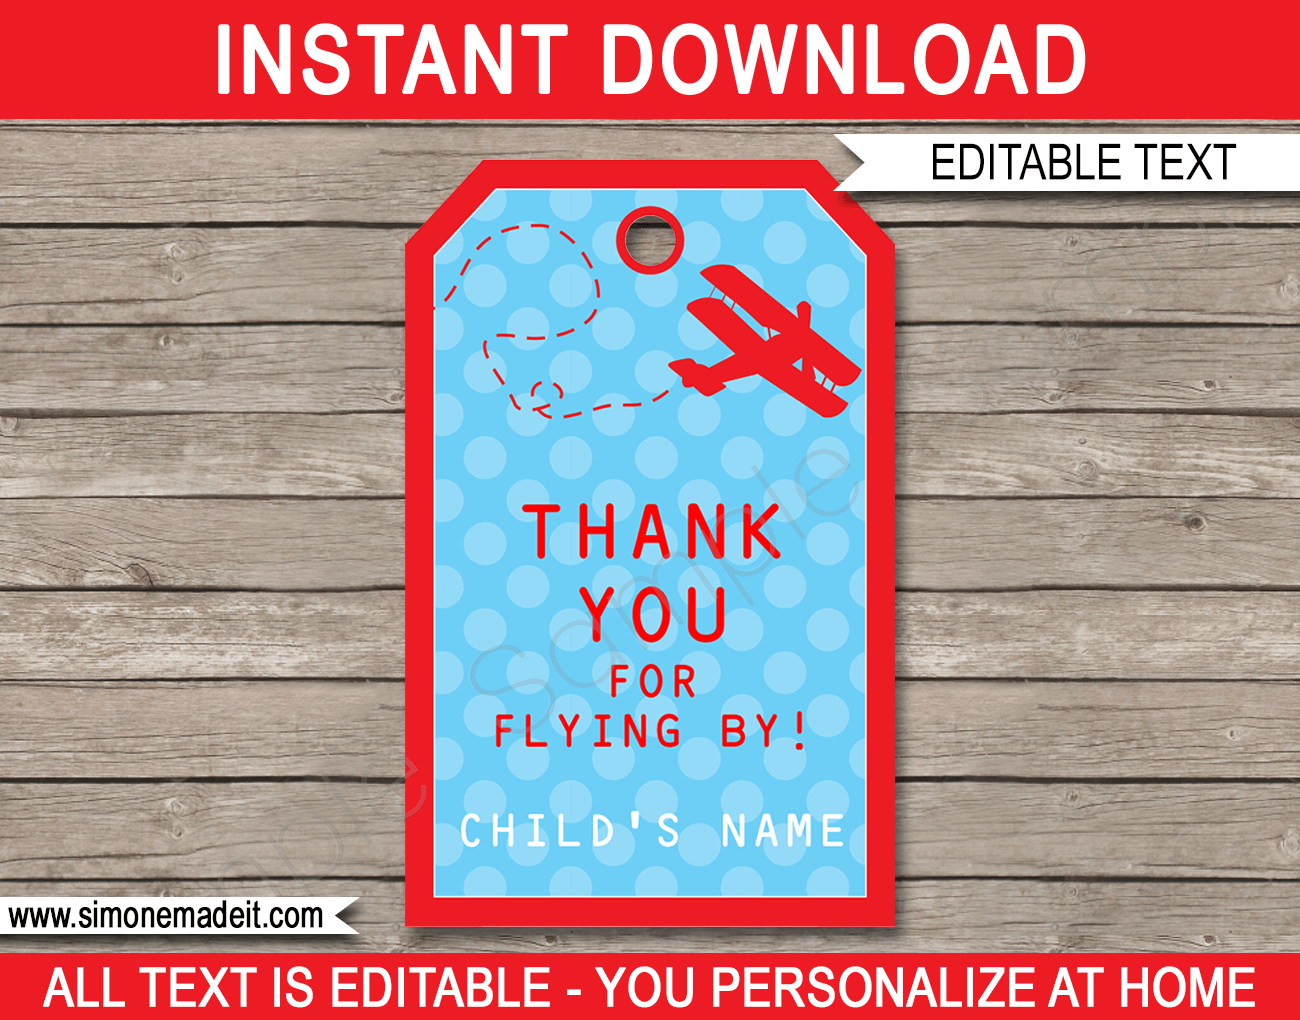 Airplane Birthday Party Favor Tags | Thank You Tags | Birthday Party | Editable DIY Template | $3.00 INSTANT DOWNLOAD via SIMONEmadeit.com